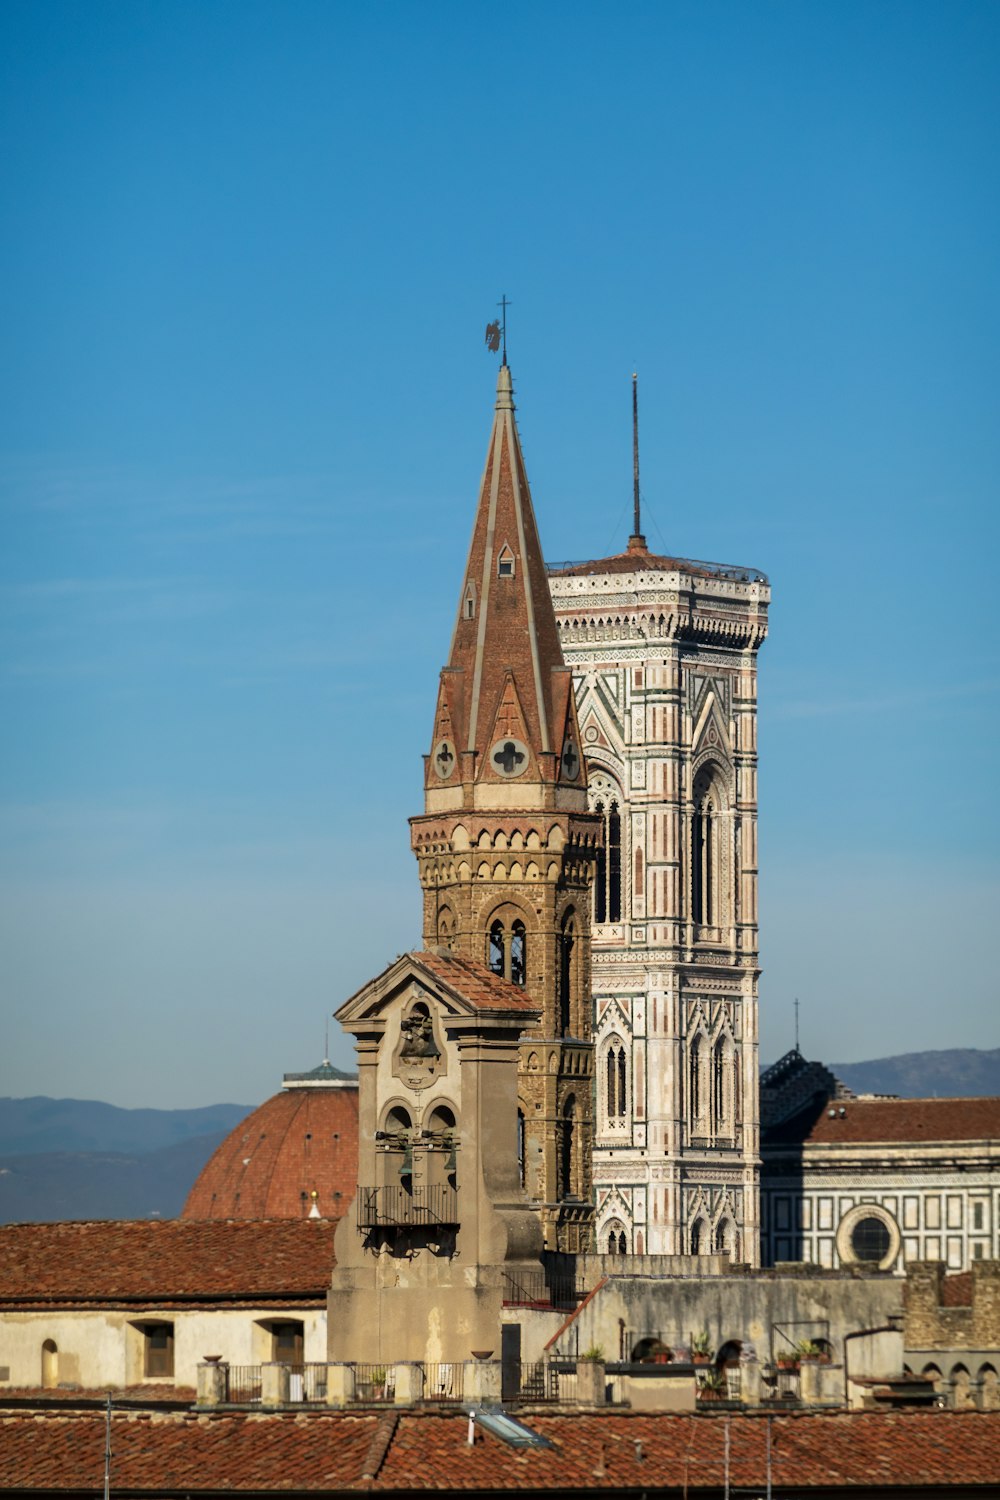 a tall tower with a clock on top of it